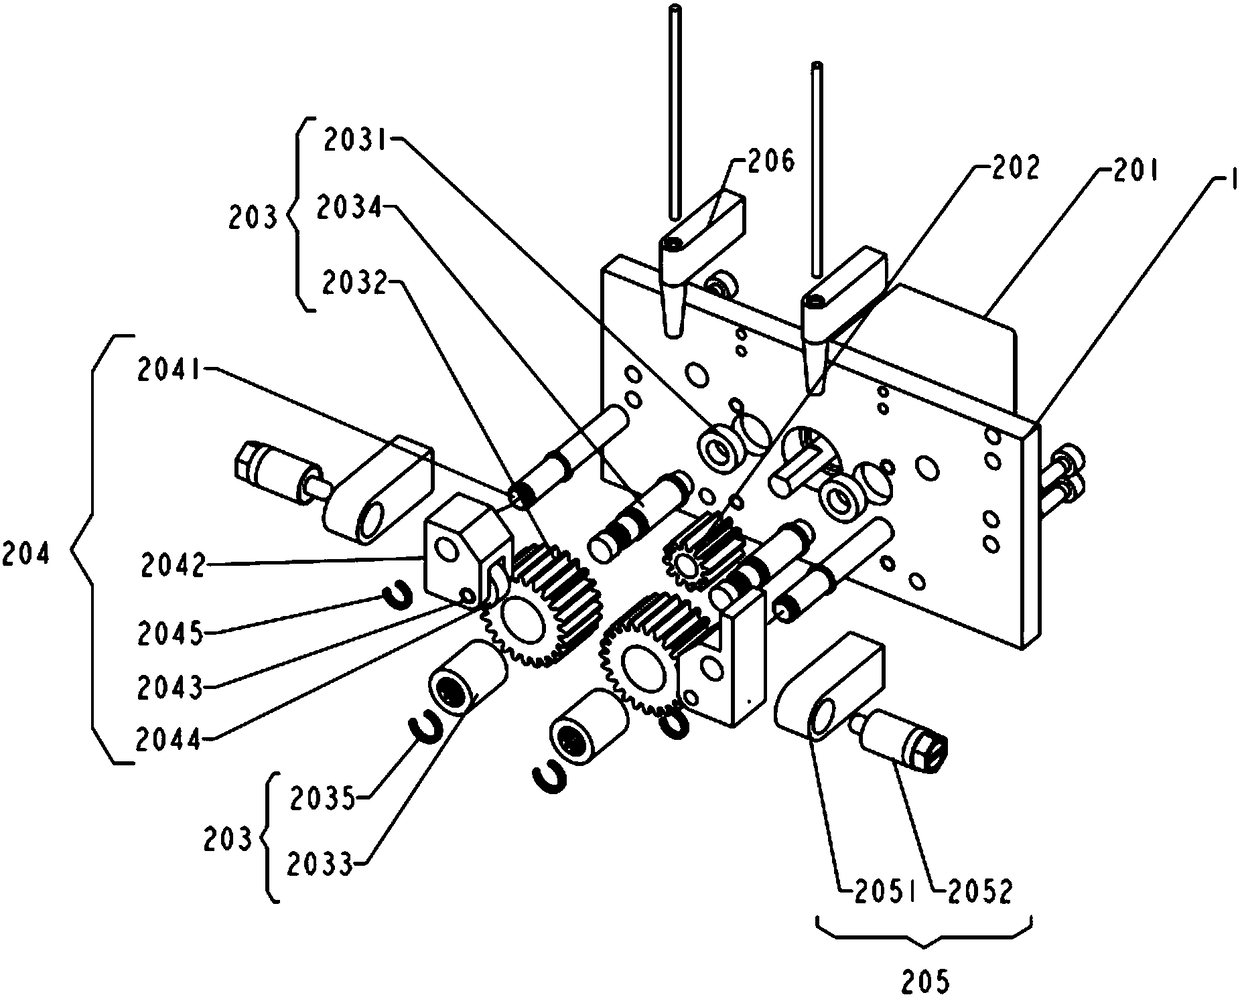 Three-dimensional printer single-motor extrusion system capable of actively switching printing head